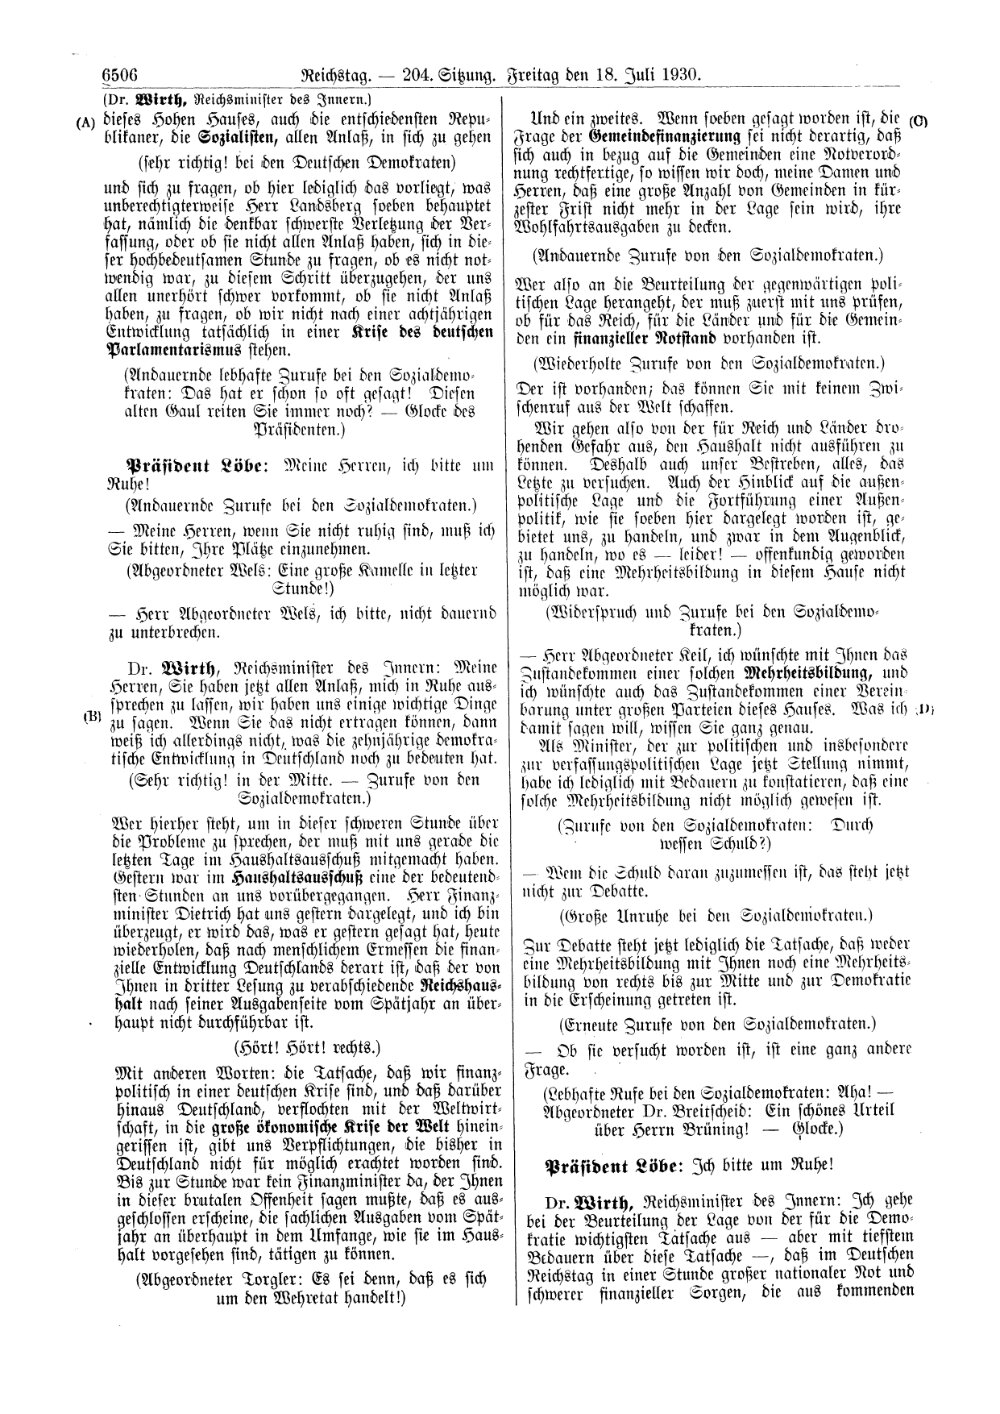 Scan of page 6506